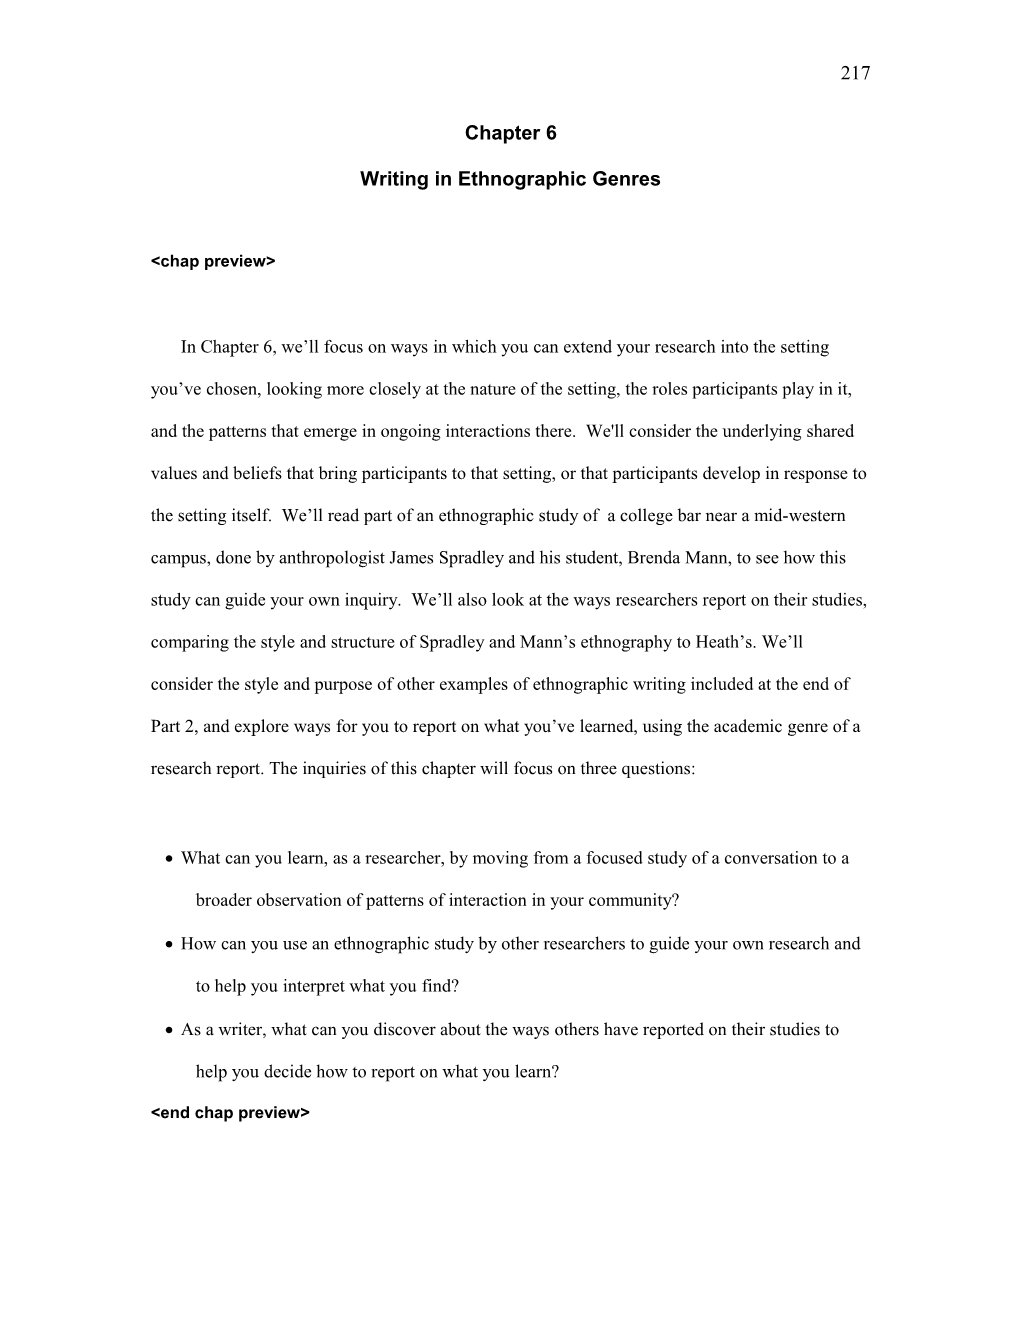 Reporting on Discourse Communities Writing in Ethnographic Genres : Speech Acts, Speech